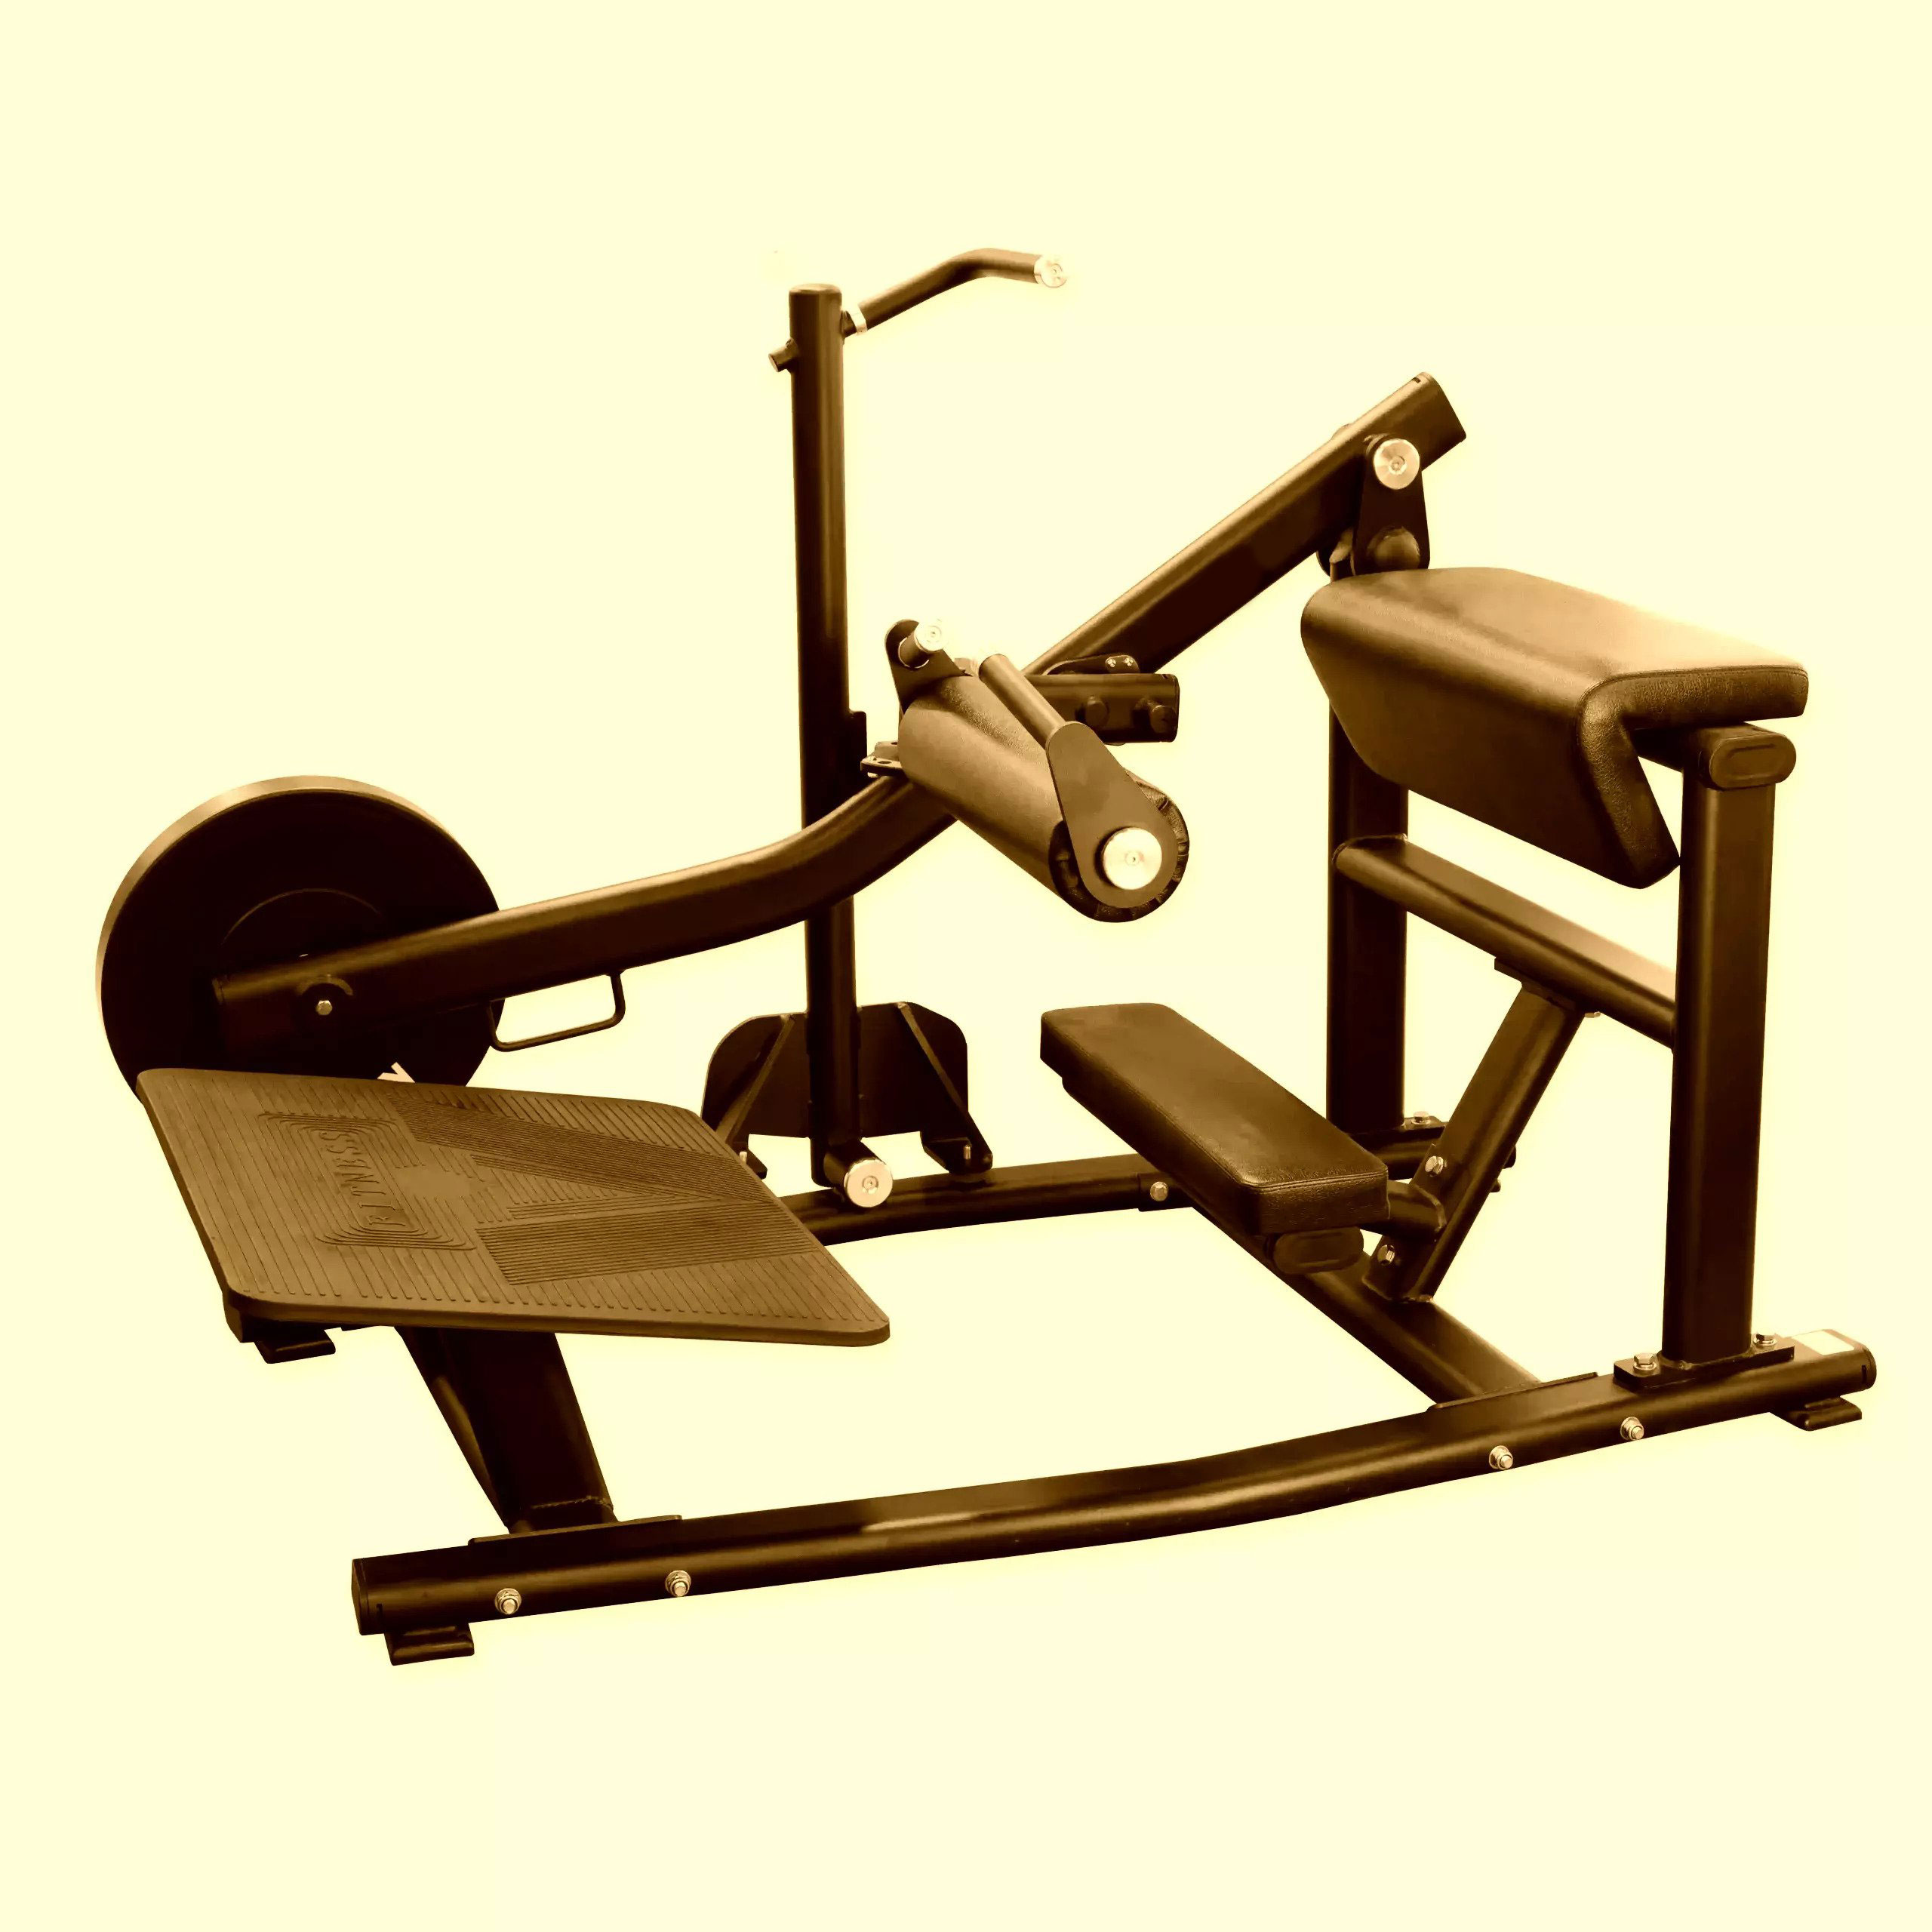 Hip Thrusts Machines: The Complete Guide